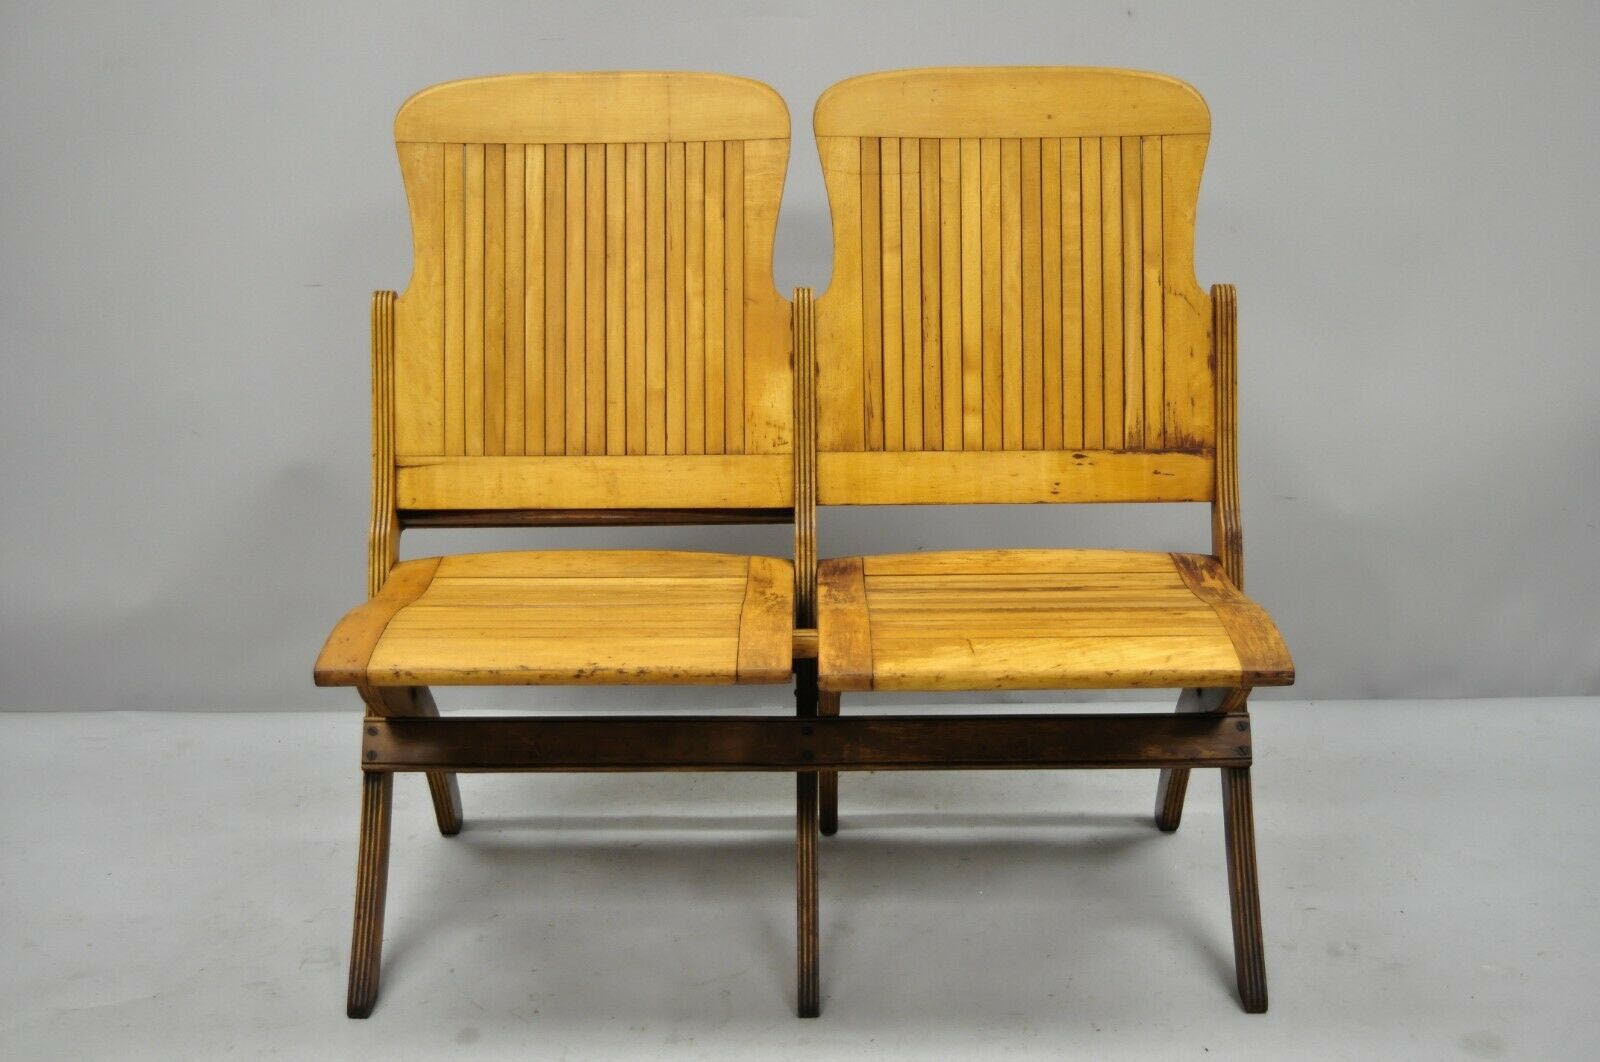 - School Slat Theater Double Bench Seat Antique Pew Wood Etsy Vintage Old Chair Folding